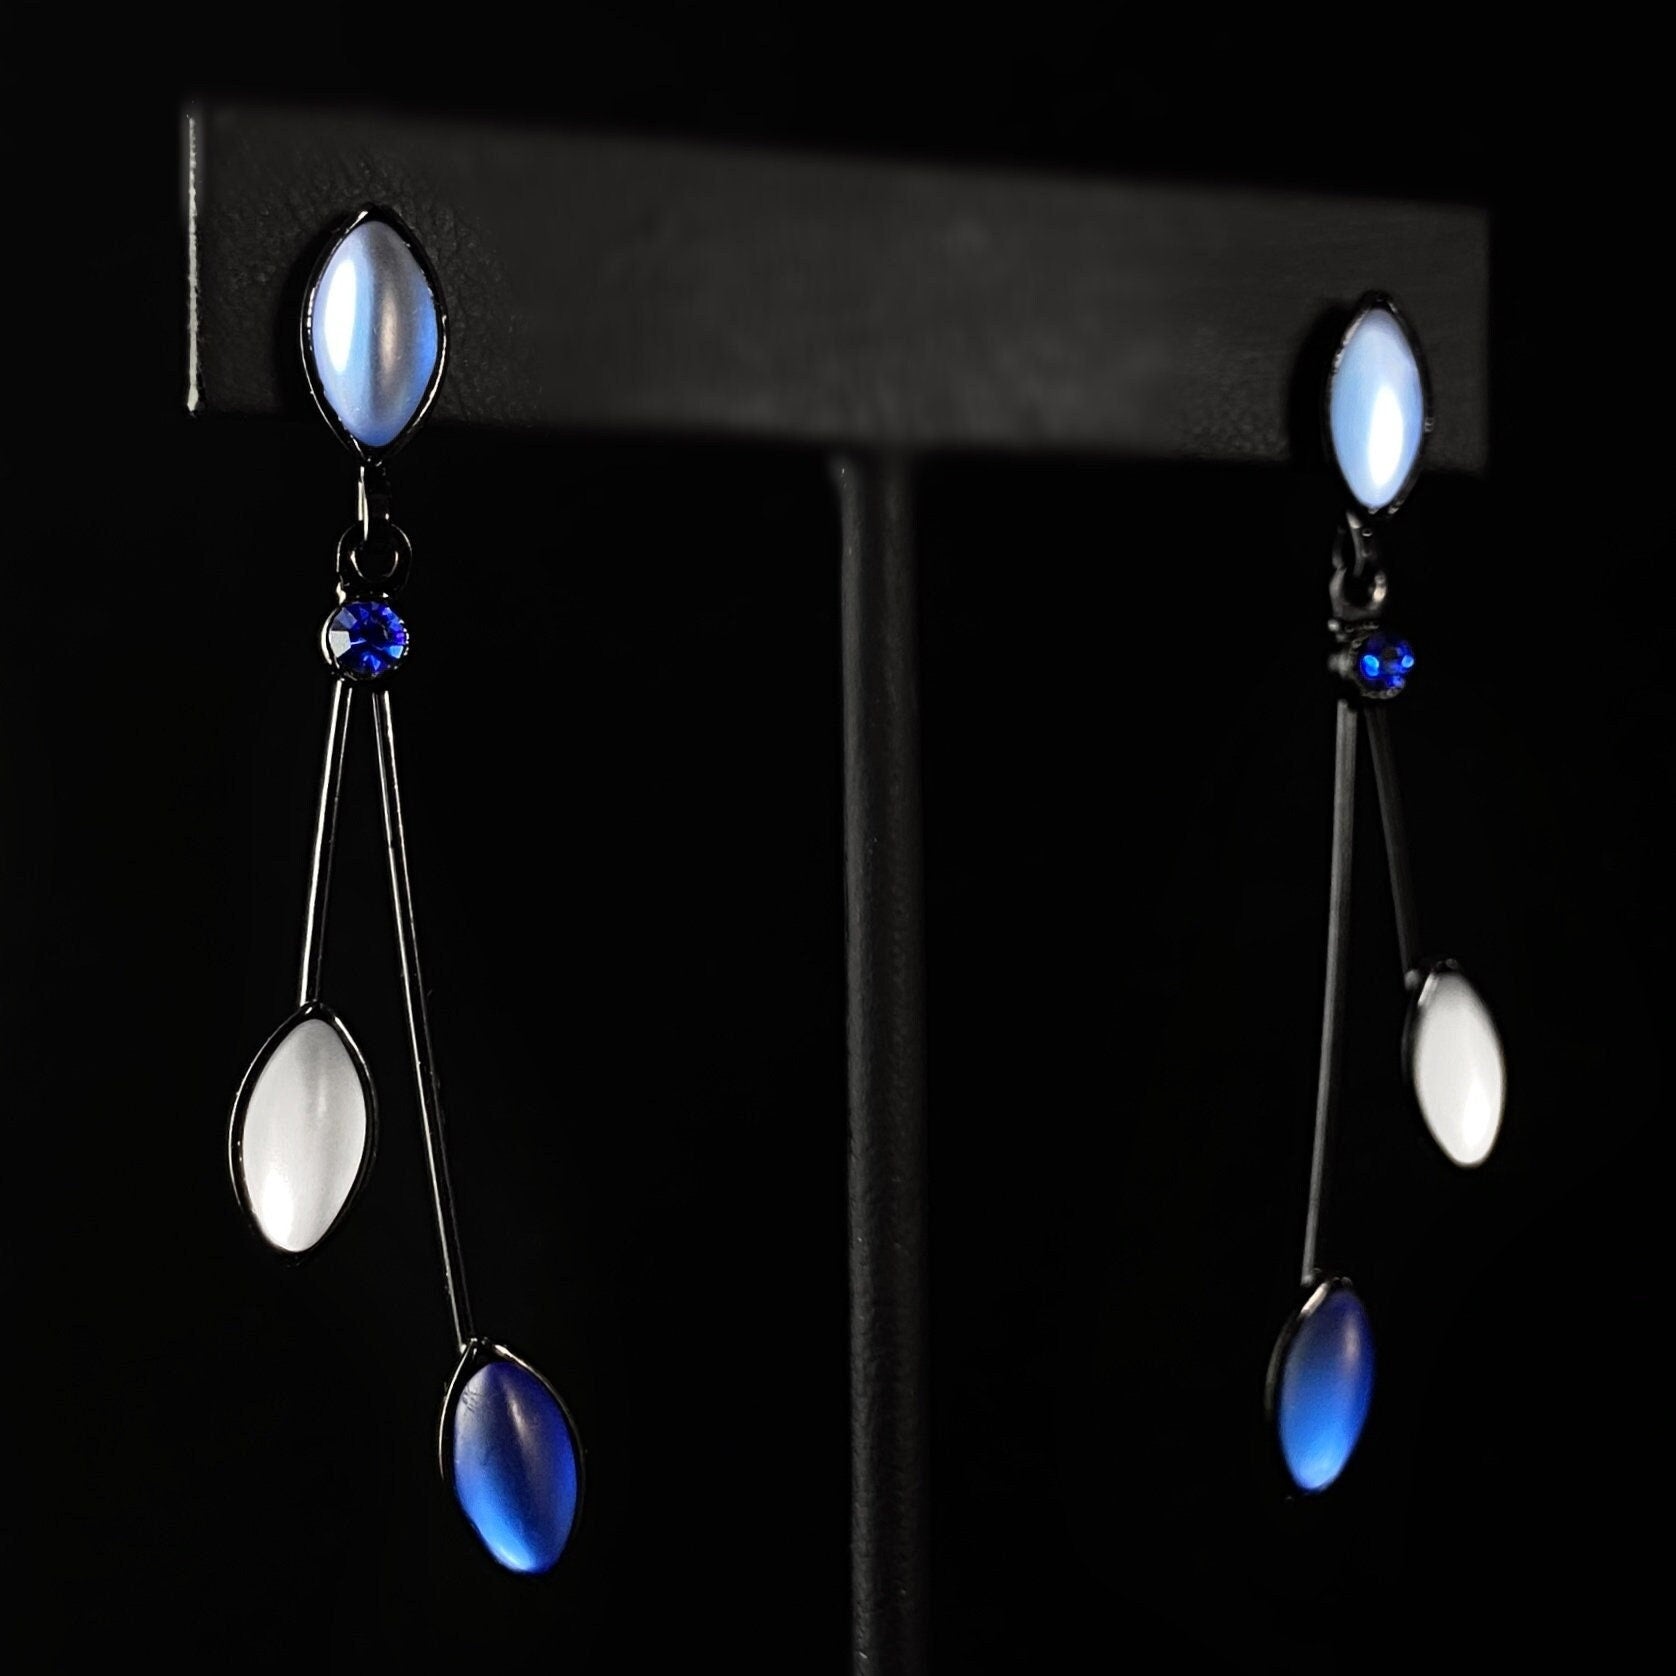 Floral Style Earrings with Black Wire and Handmade Glass Beads, Hypoallergenic, Blue/White - Kristina